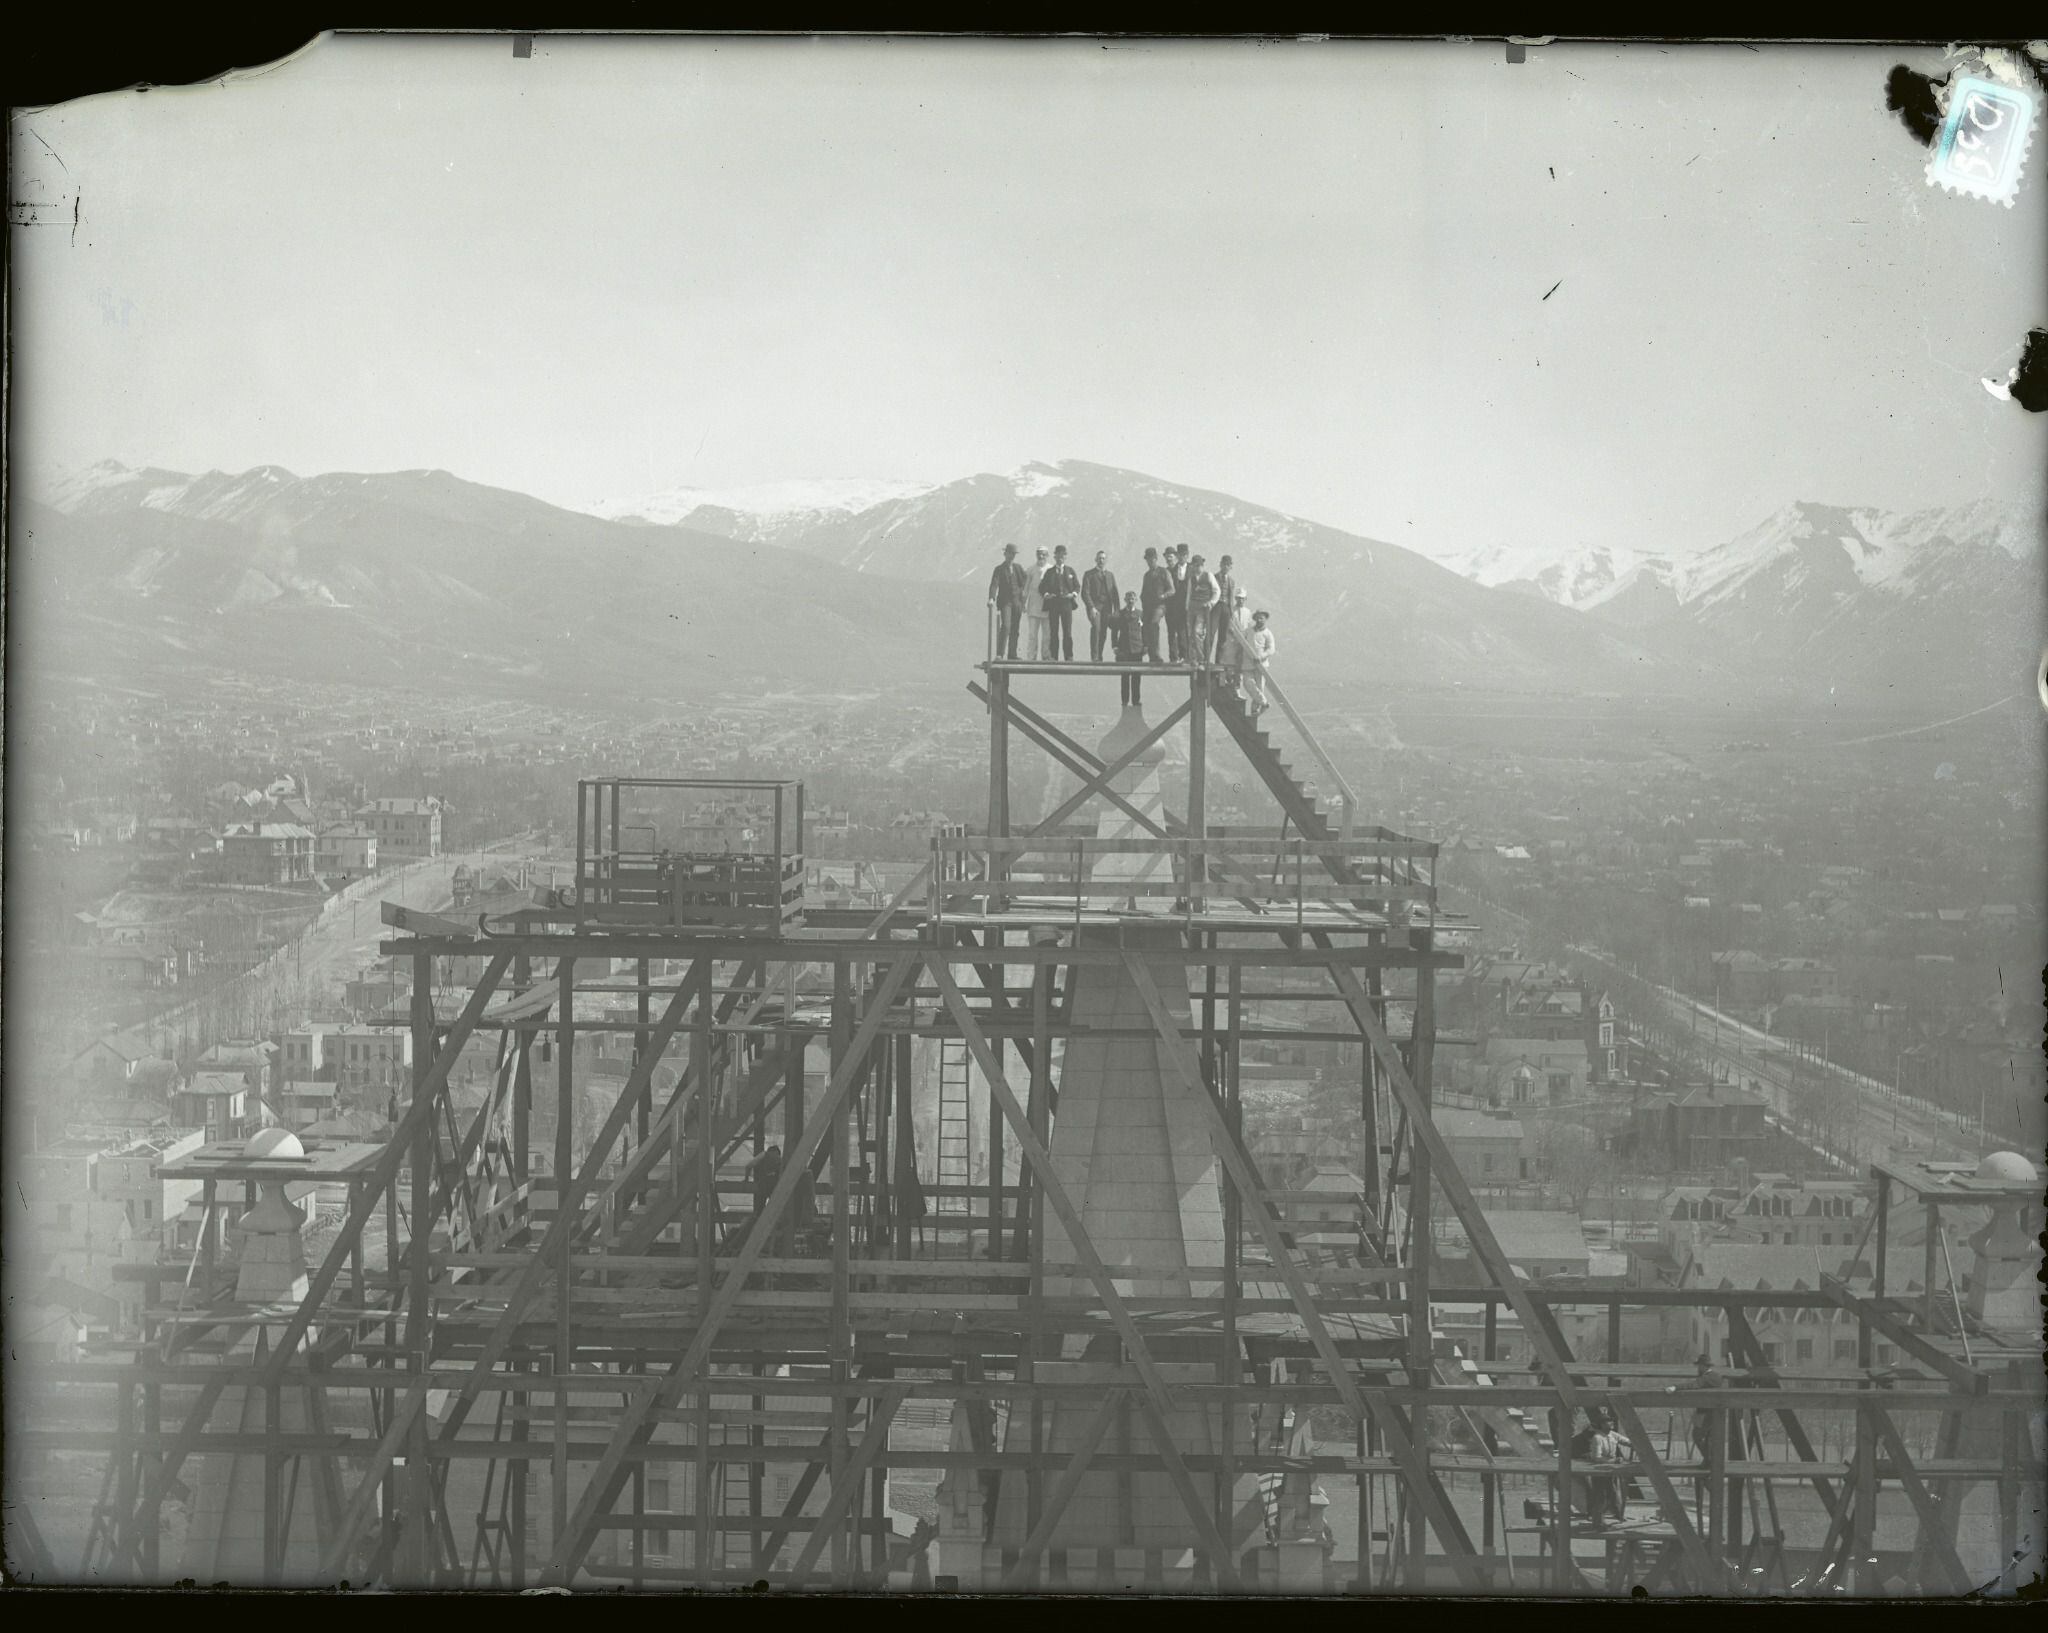 (photo courtesy The Church of Jesus Christ of Latter-day Saints) Workers stand atop the Salt Lake Temple before the placement of the capstone in April 1892.